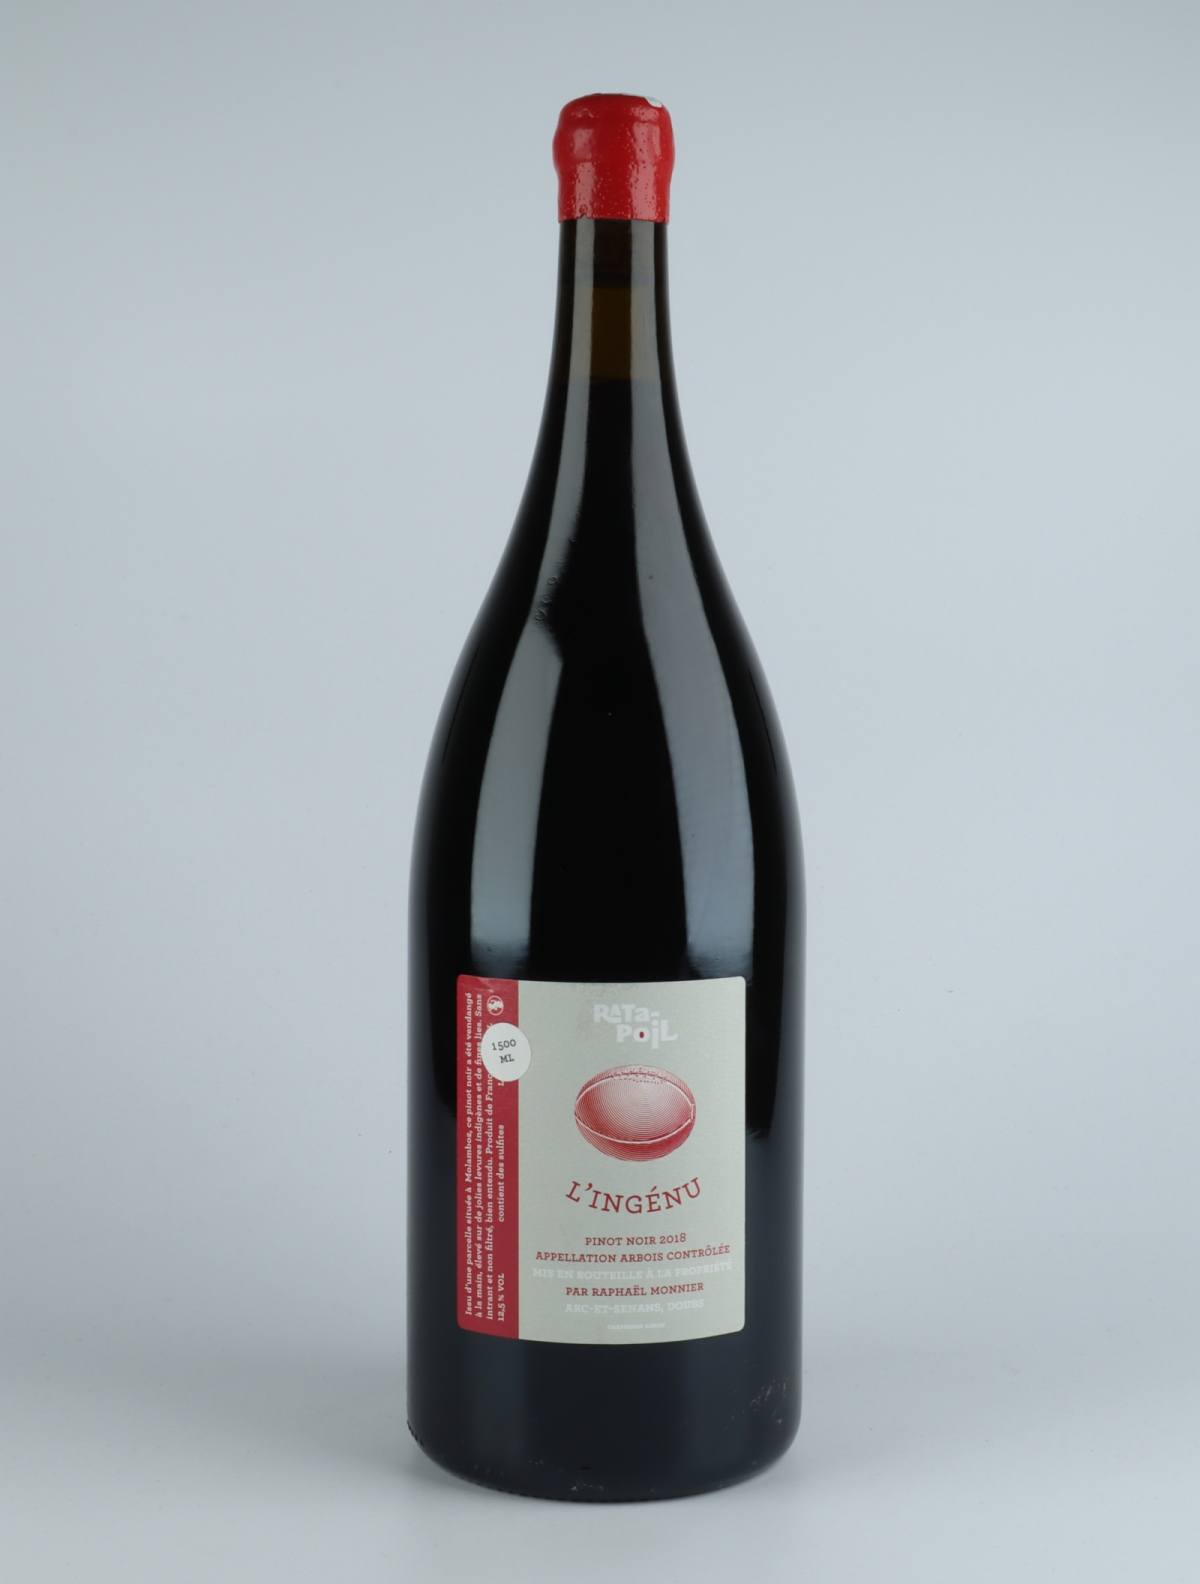 A bottle 2018 Ingenu Red wine from Domaine Ratapoil, Jura in France